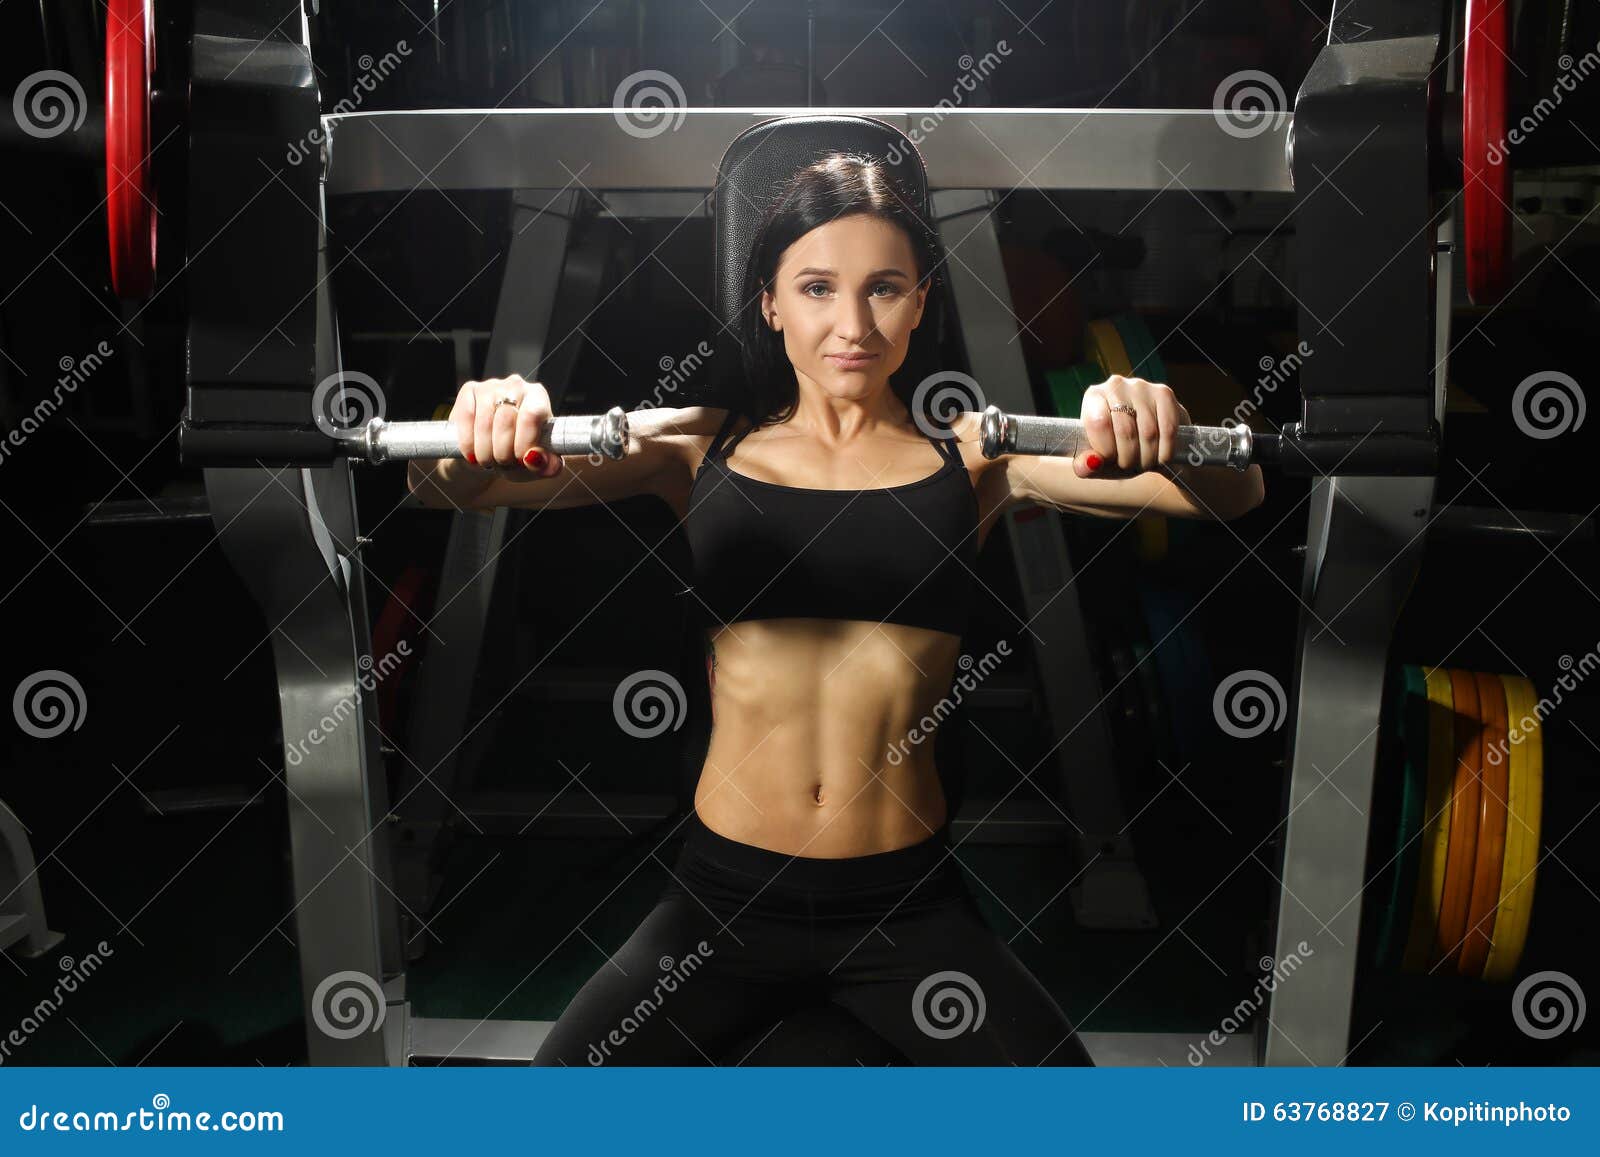 https://thumbs.dreamstime.com/z/woman-trains-pecs-gym-attractive-brunette-engaged-simulator-63768827.jpg